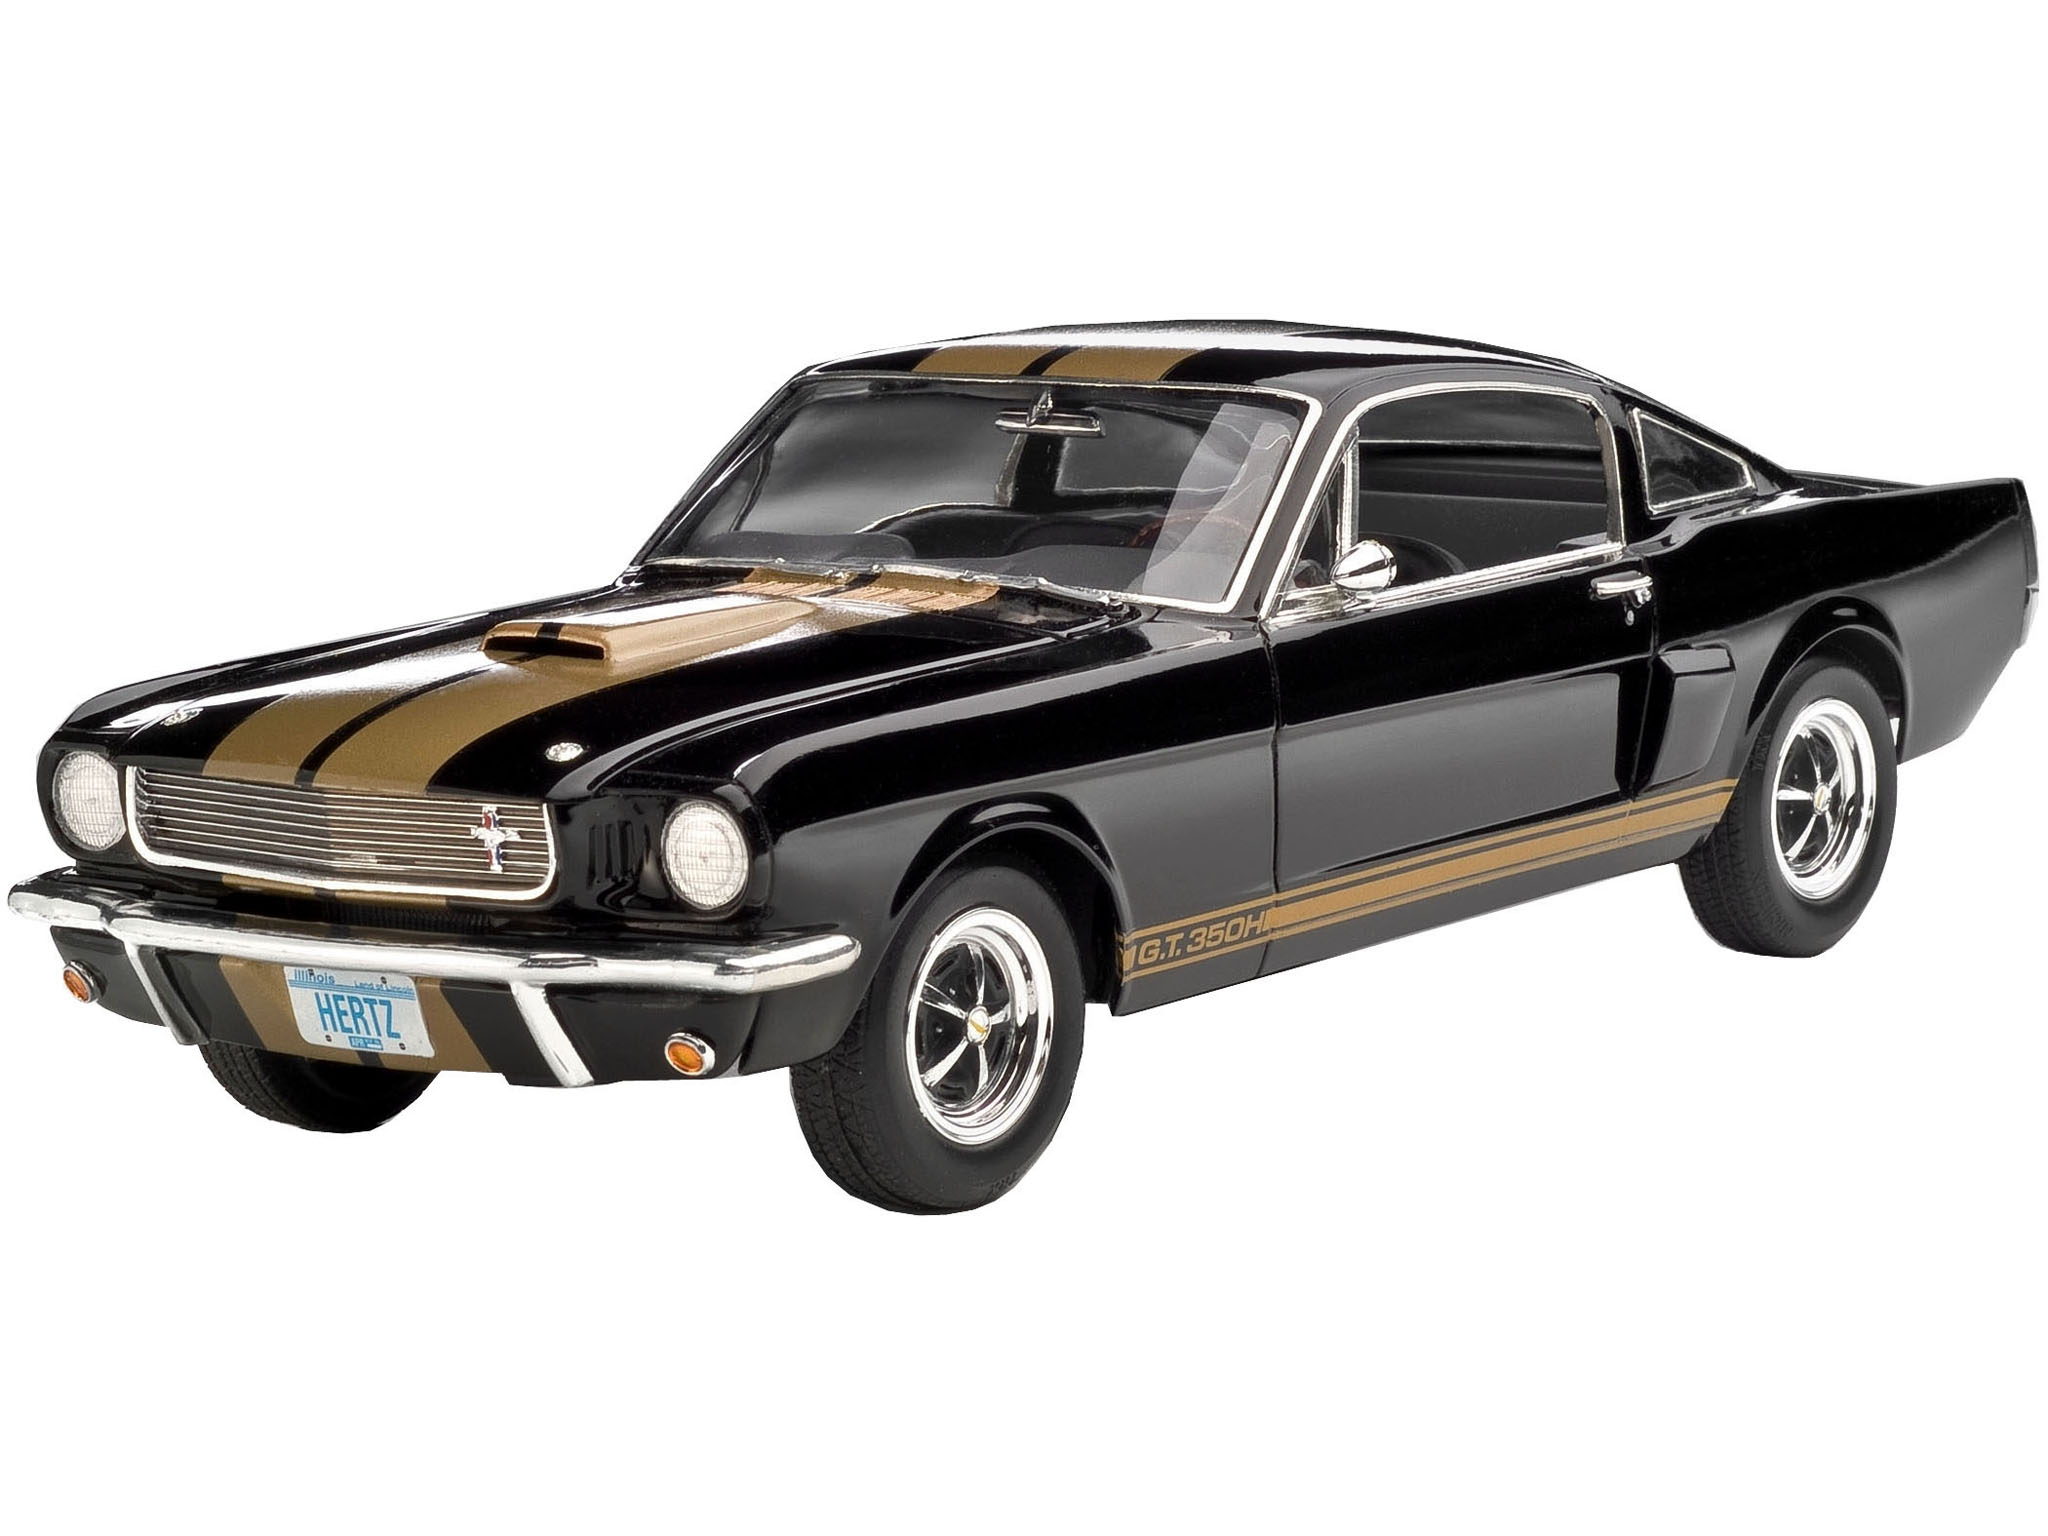 Shelby Mustang GT 350 H - Shelby Mustang GT 350 H 1:24